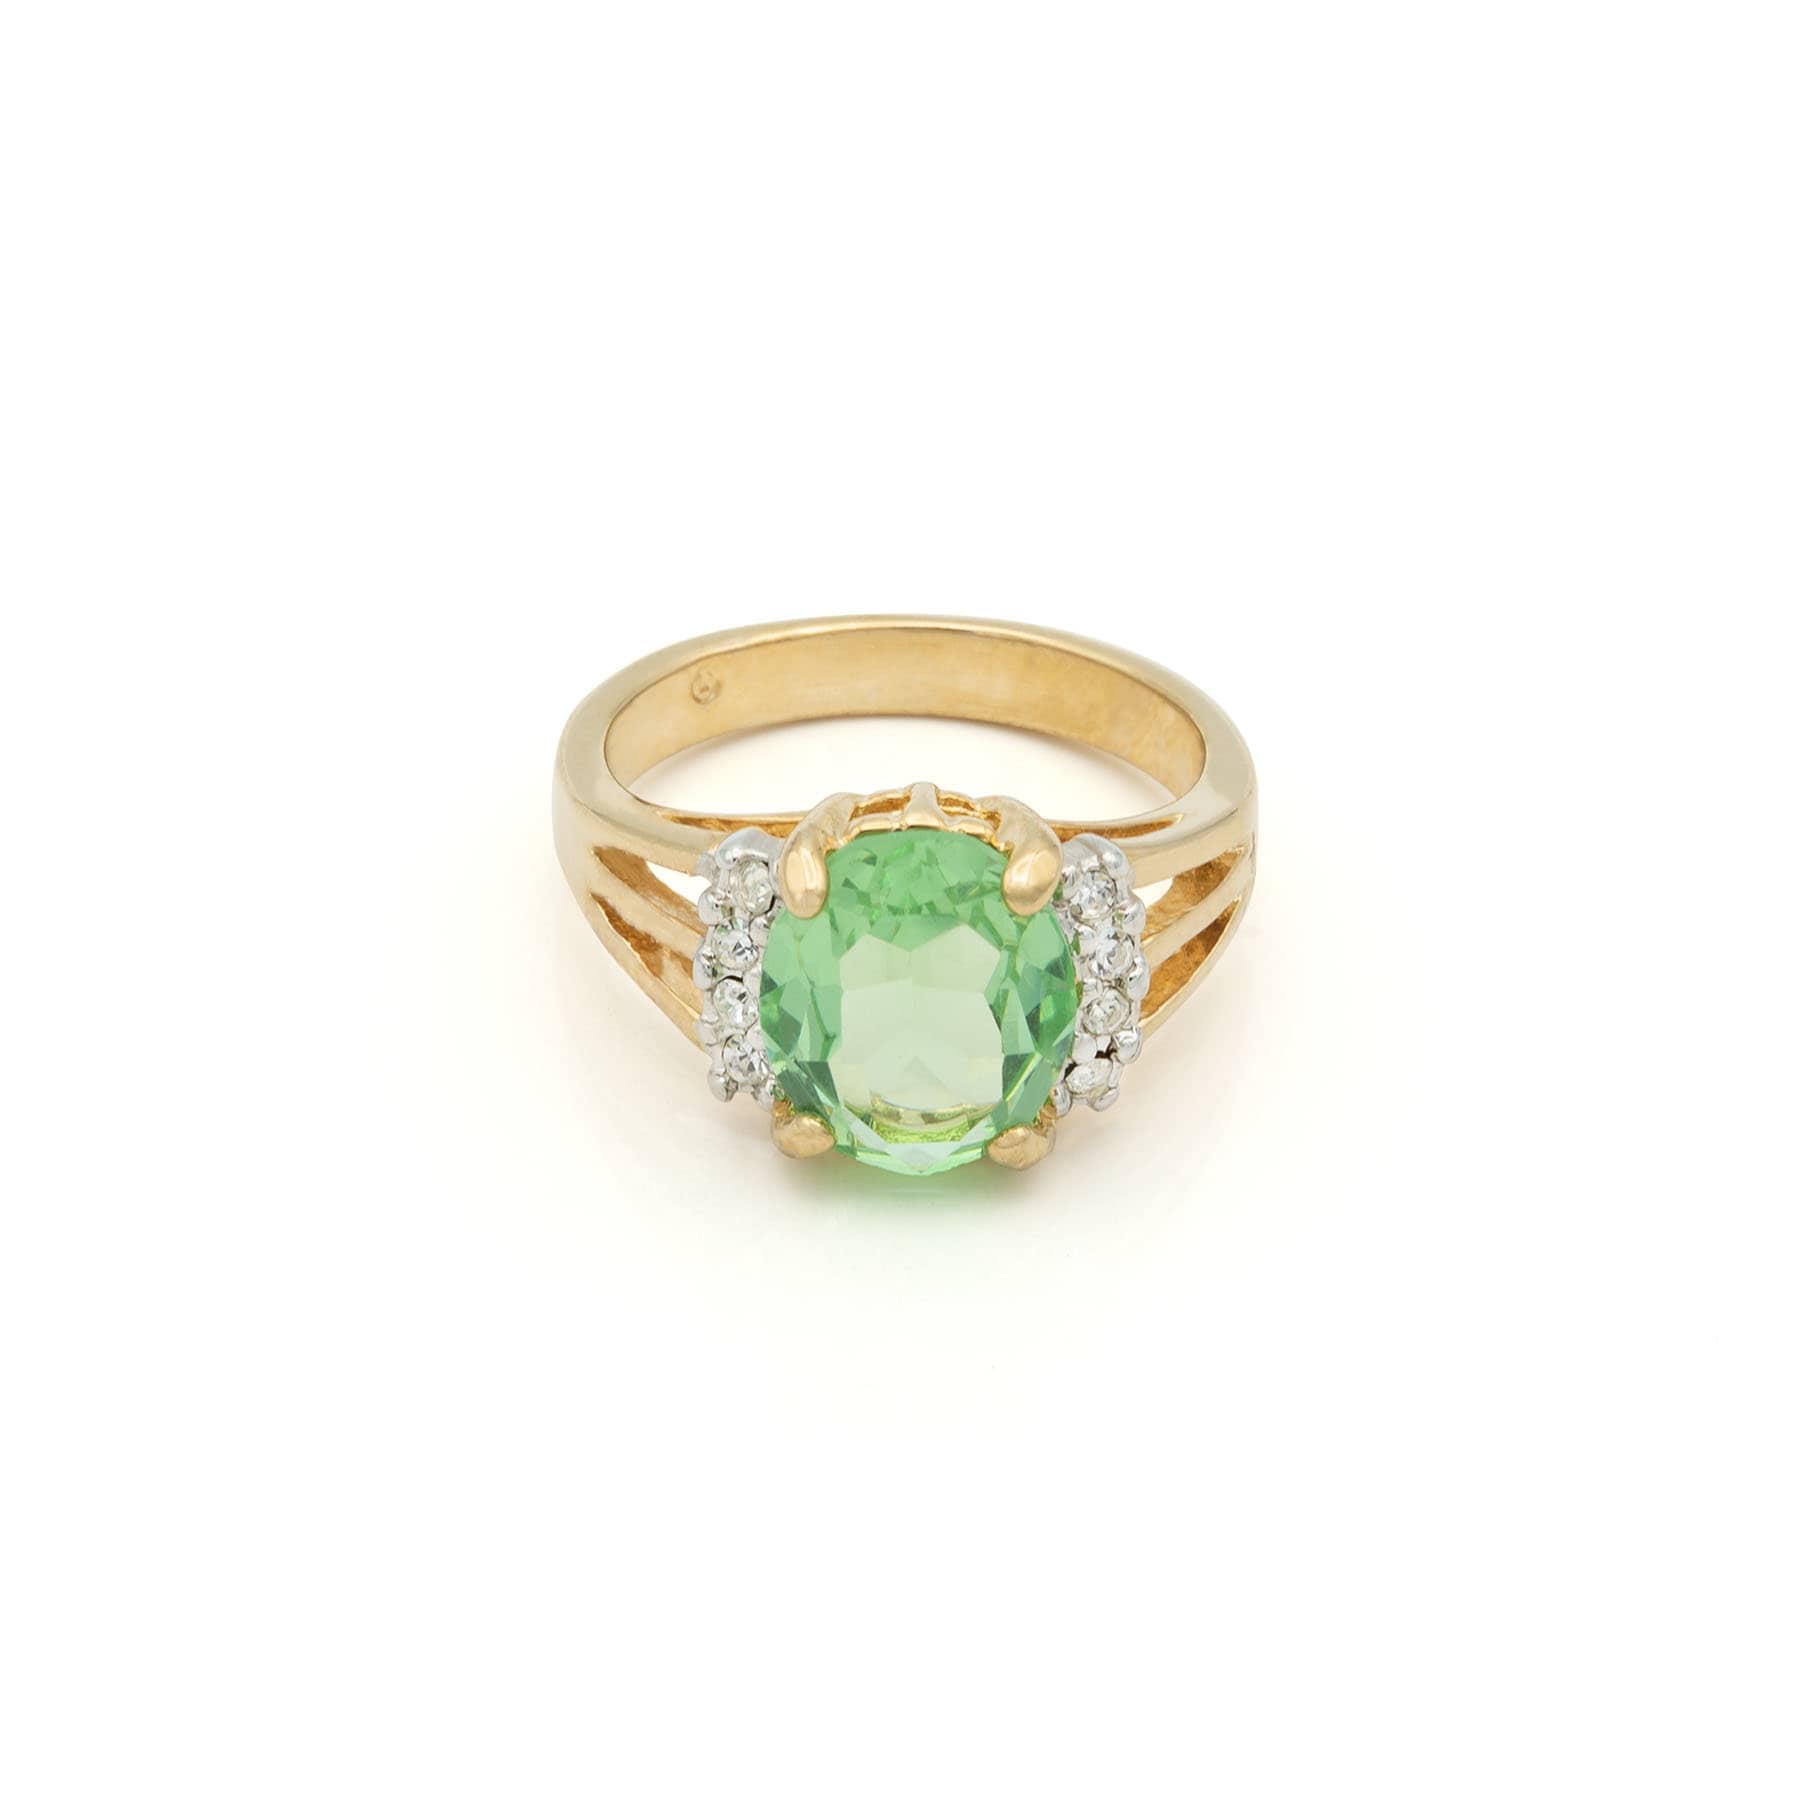 Vintage Ring 1980's Peridot Cubic Zirconia Ring with Clear Crystals 18k Gold Jewelry R1664 - Limited Stock - Never Worn